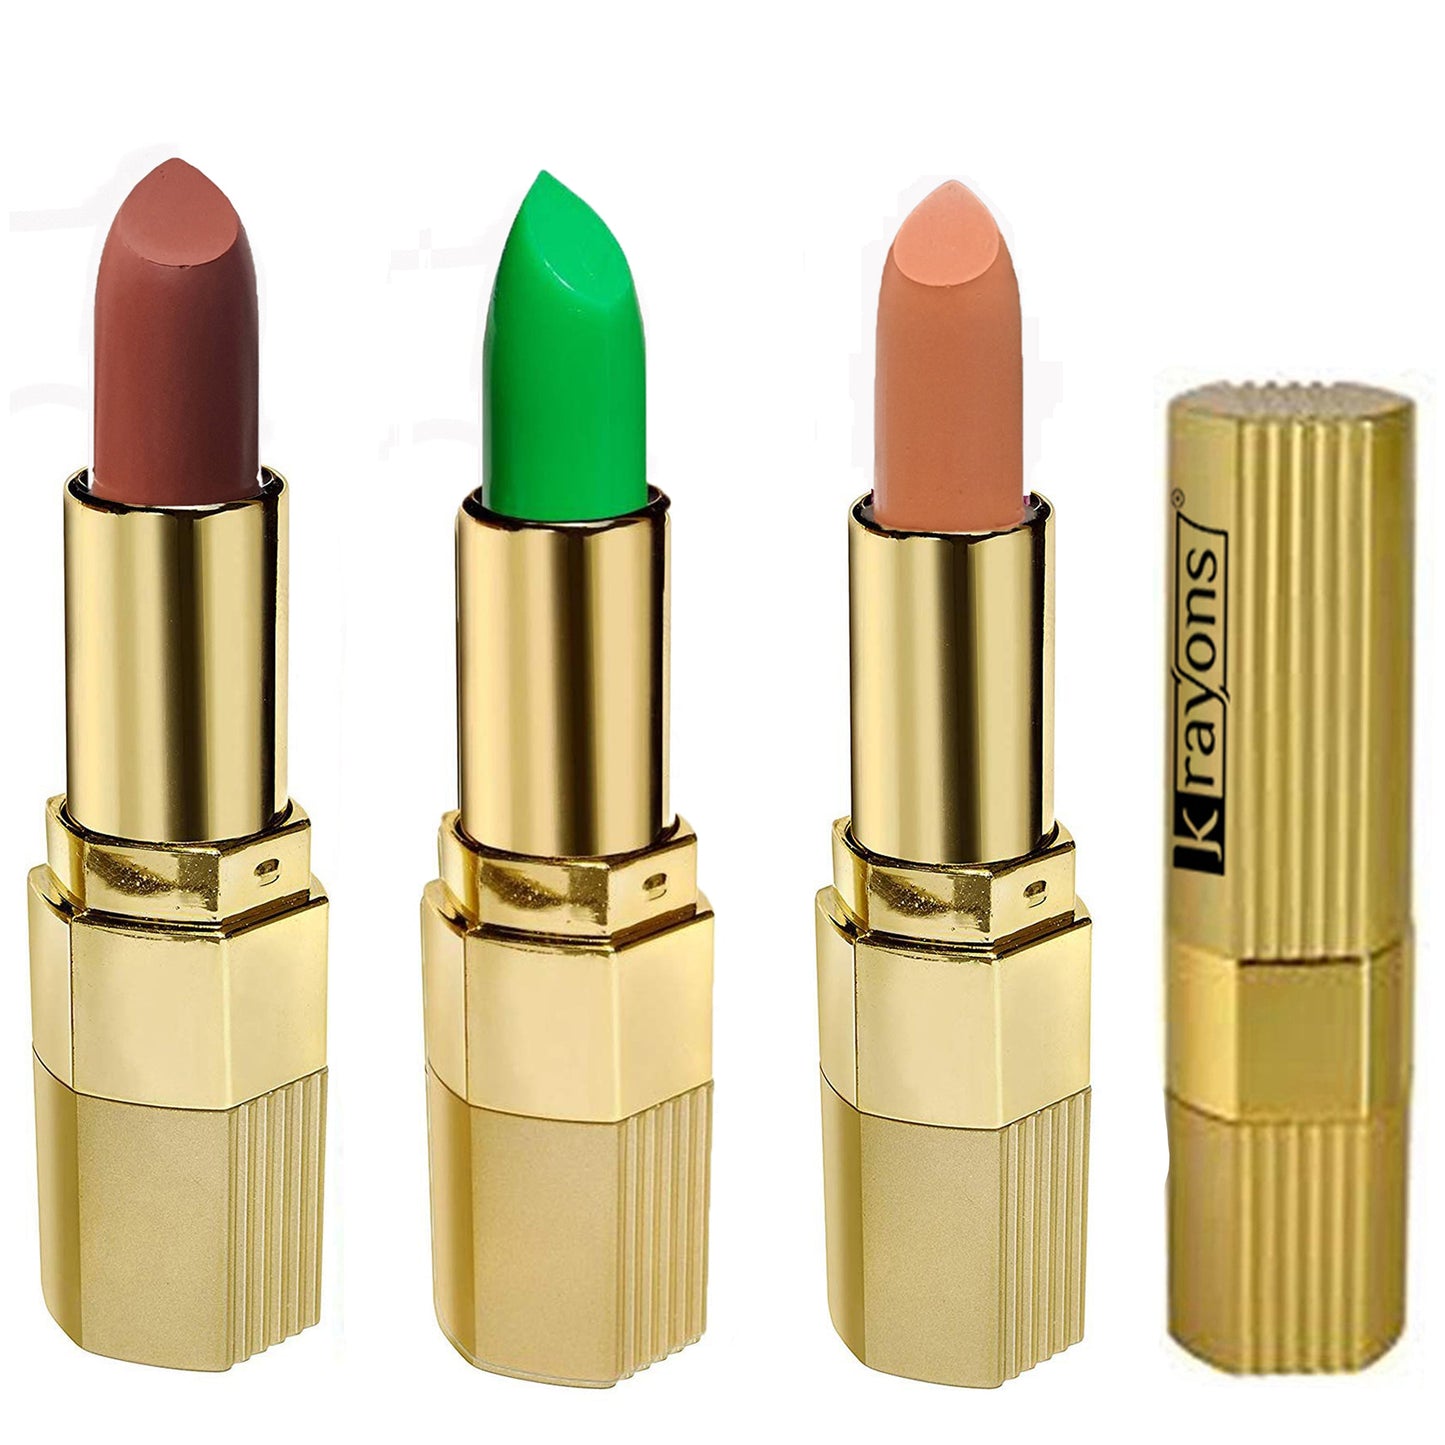 Krayons Desire Lipstick, Highly Pigmented, Longlasting, 3.5g Each, Combo, Pack of 3 (Caramel Brown, Magic Pink, Nude Caramel)